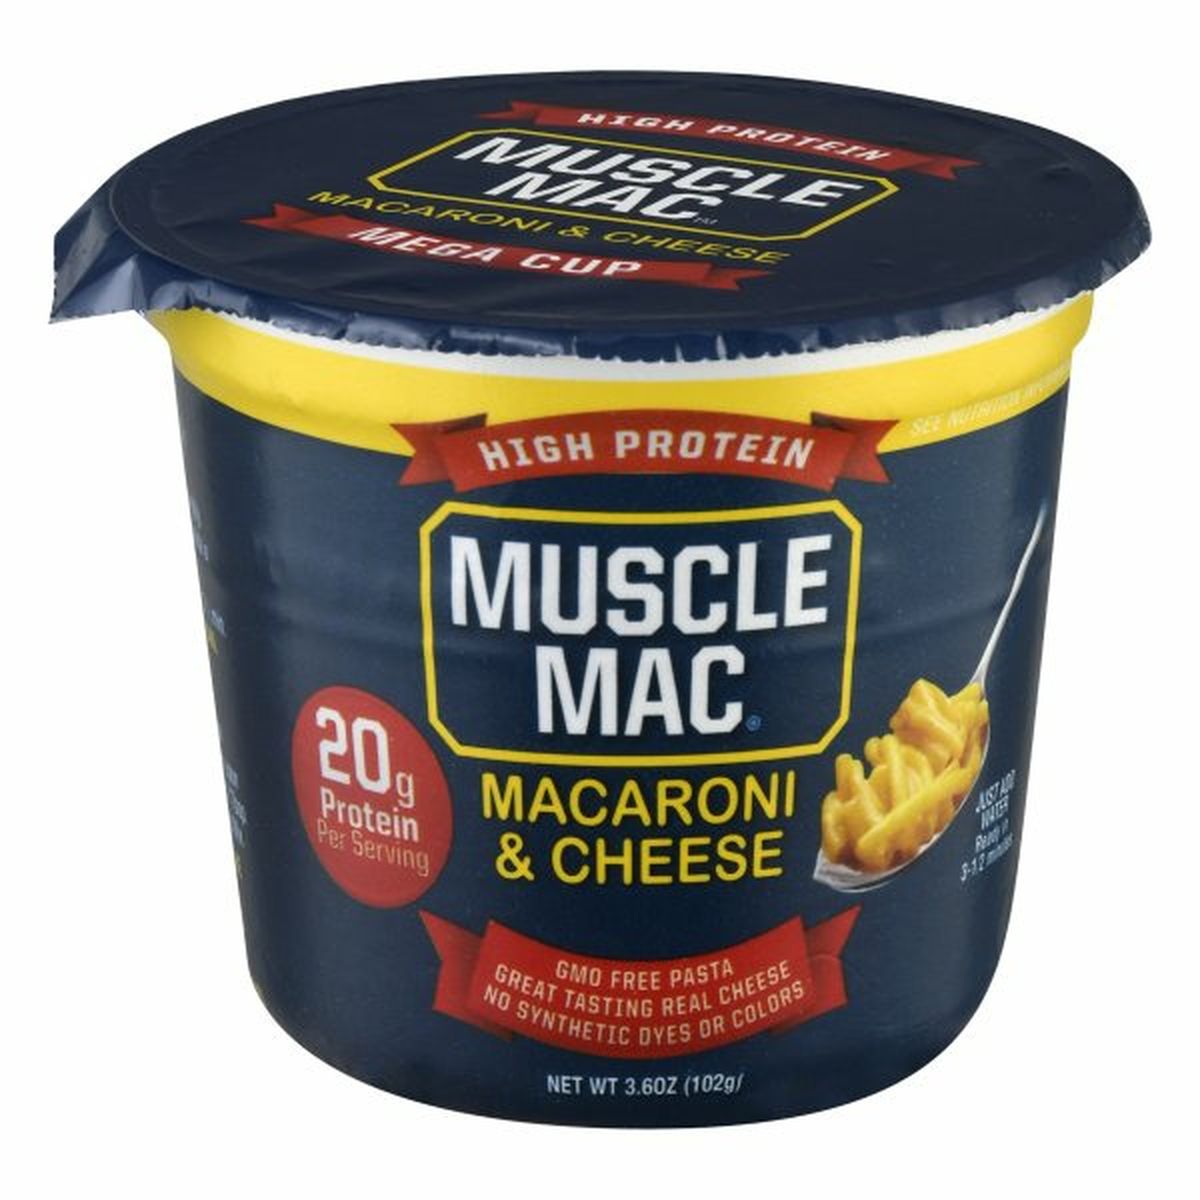 Calories in Muscle Mac Macaroni & Cheese, High Protein